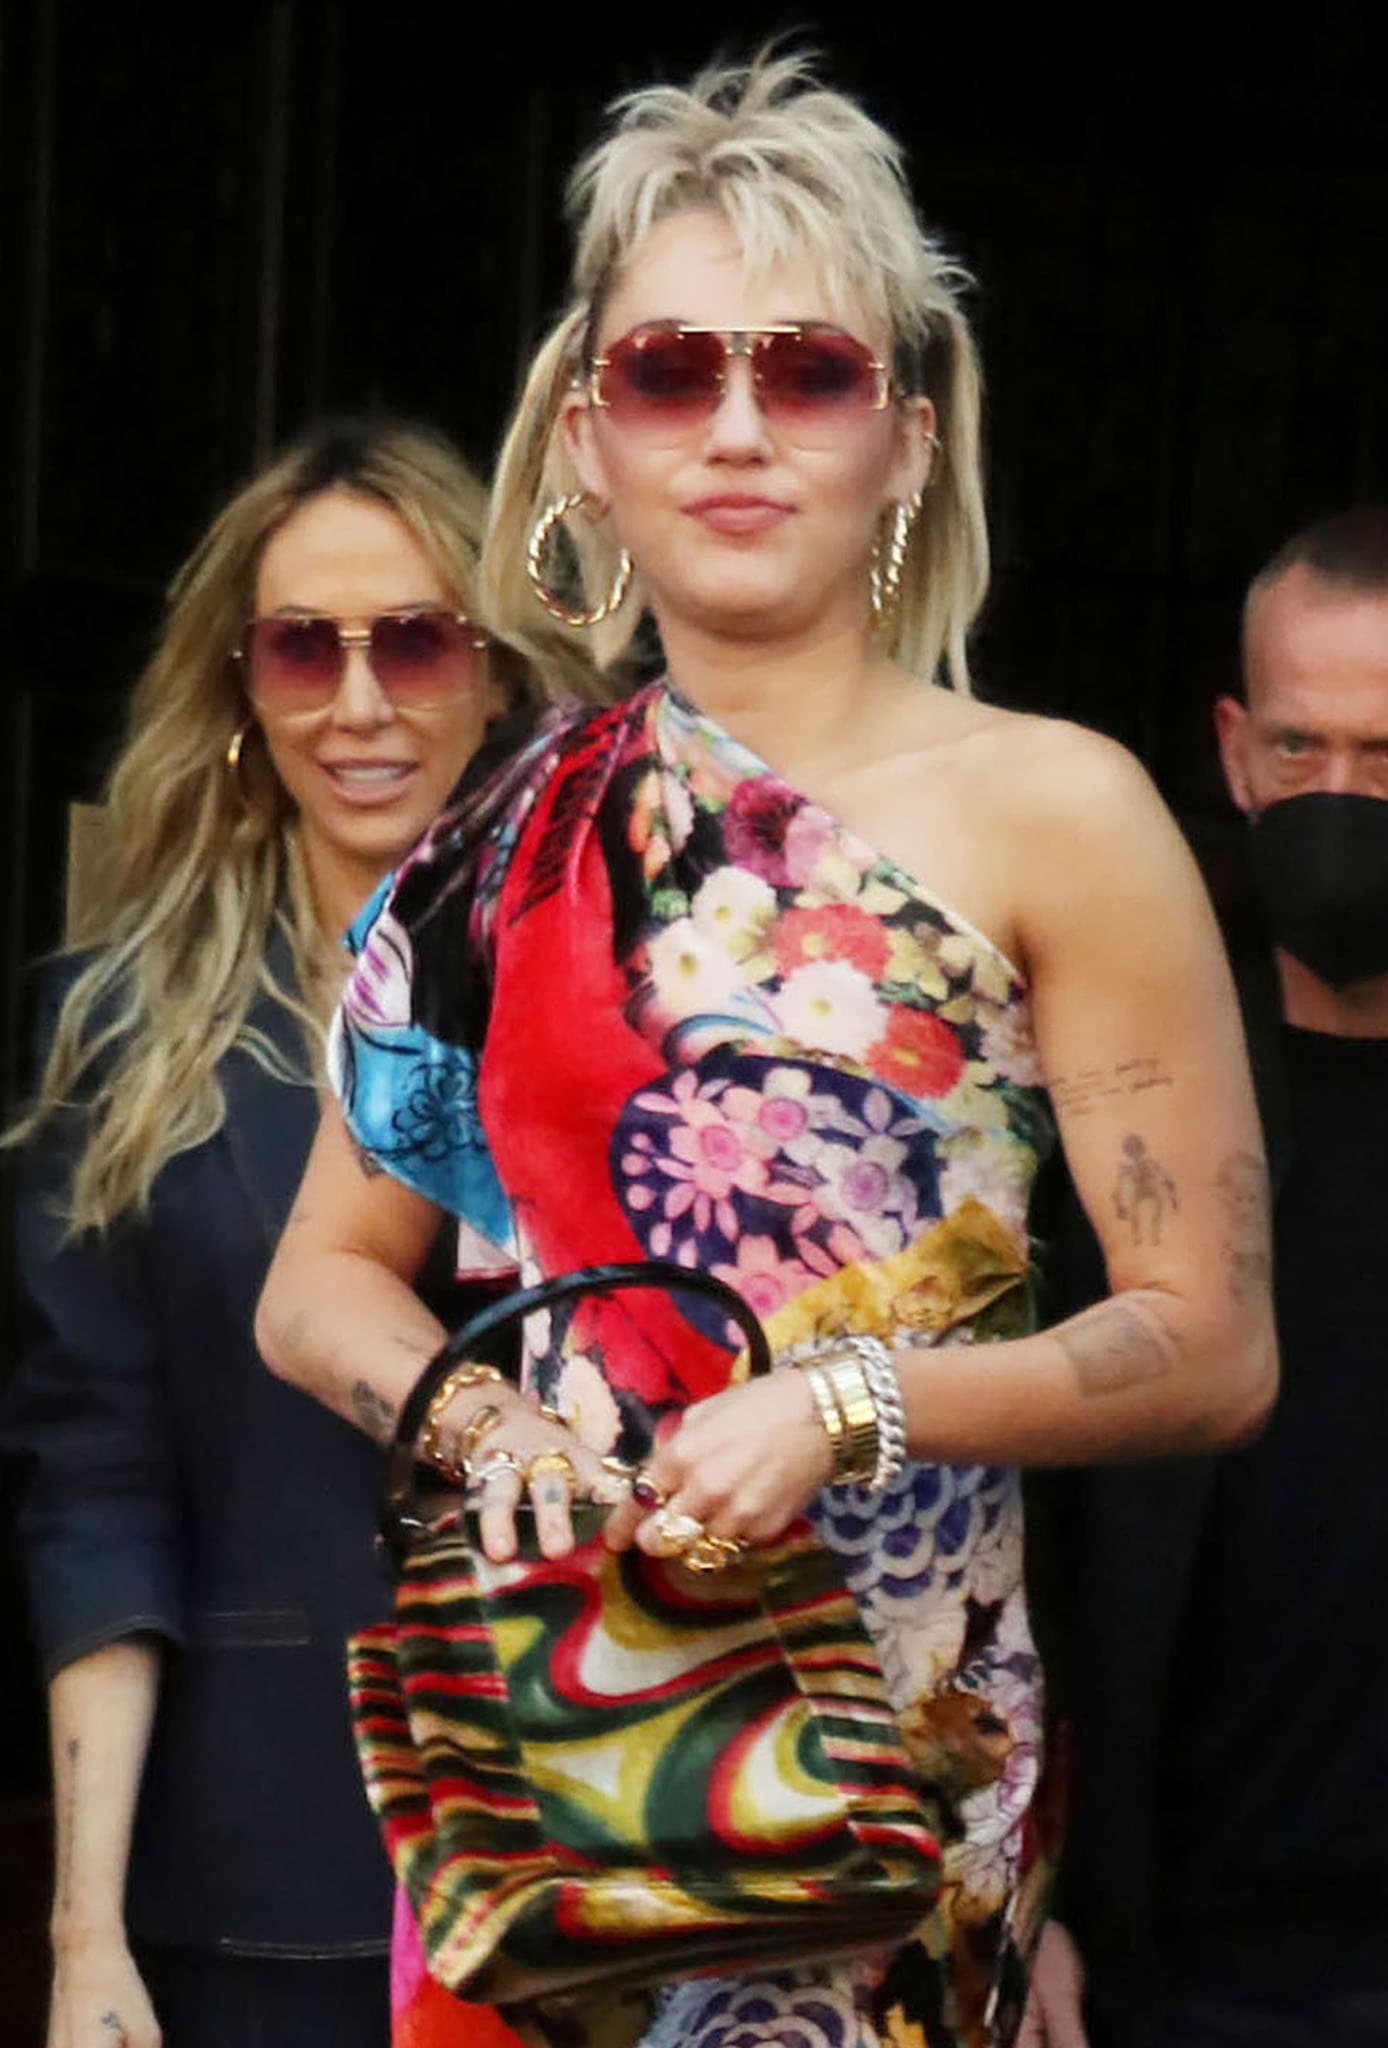 Miley Cyrus continues with her '70s look with Gucci Psychedelic bag, blonde mullet pigtails, and Celine pink sunglasses